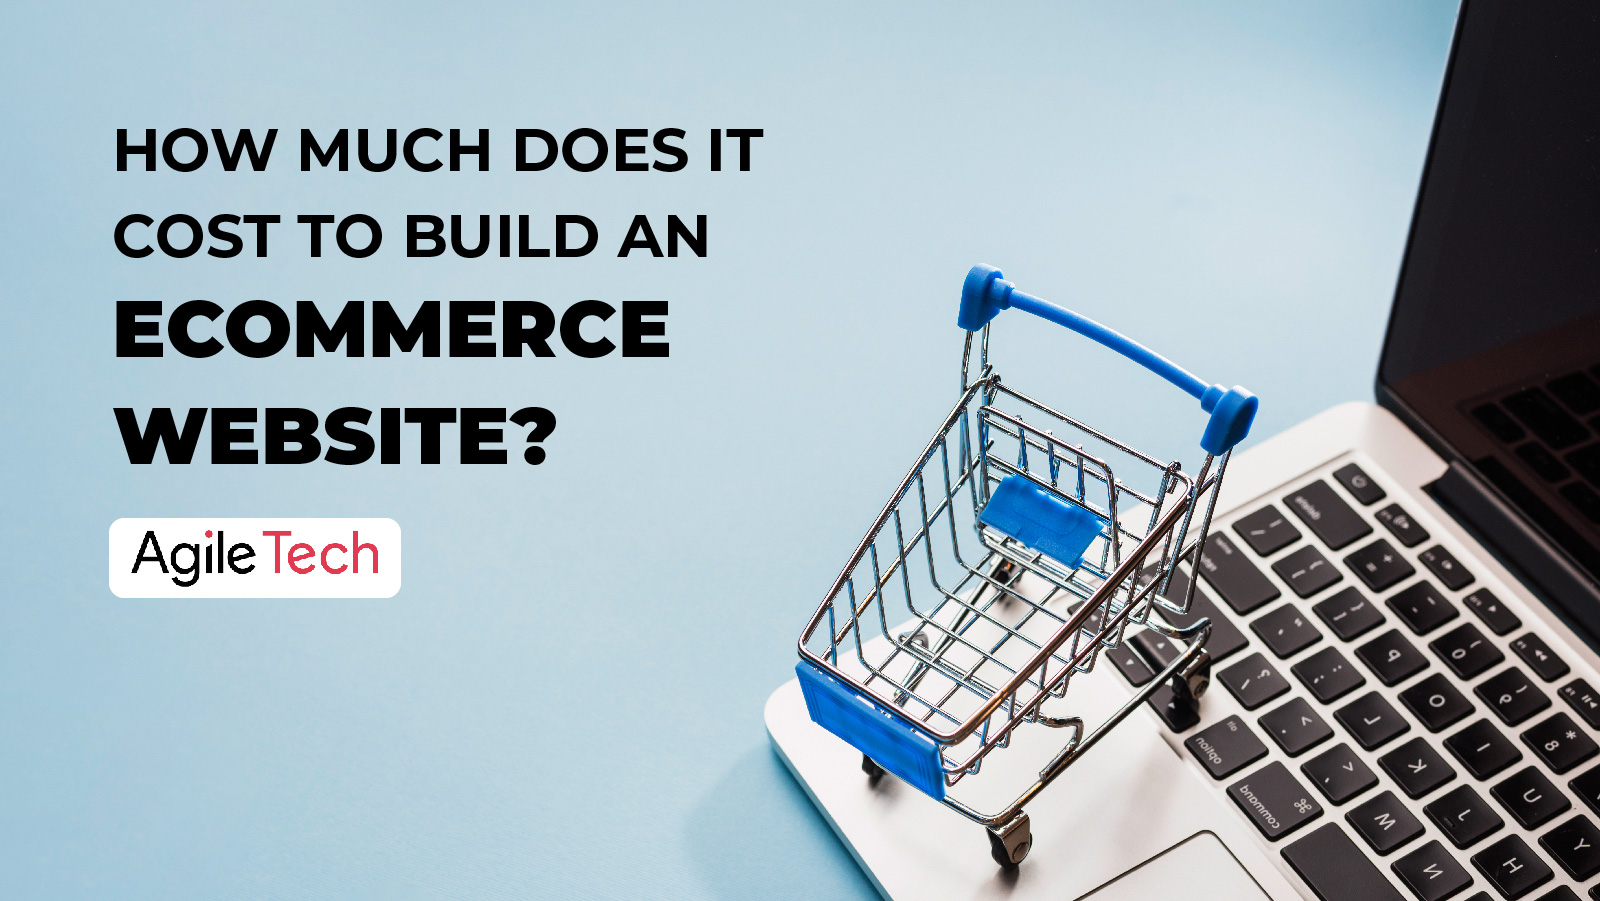 How Much Does An Ecommerce Website Cost? (Updated 2021 Pricing)